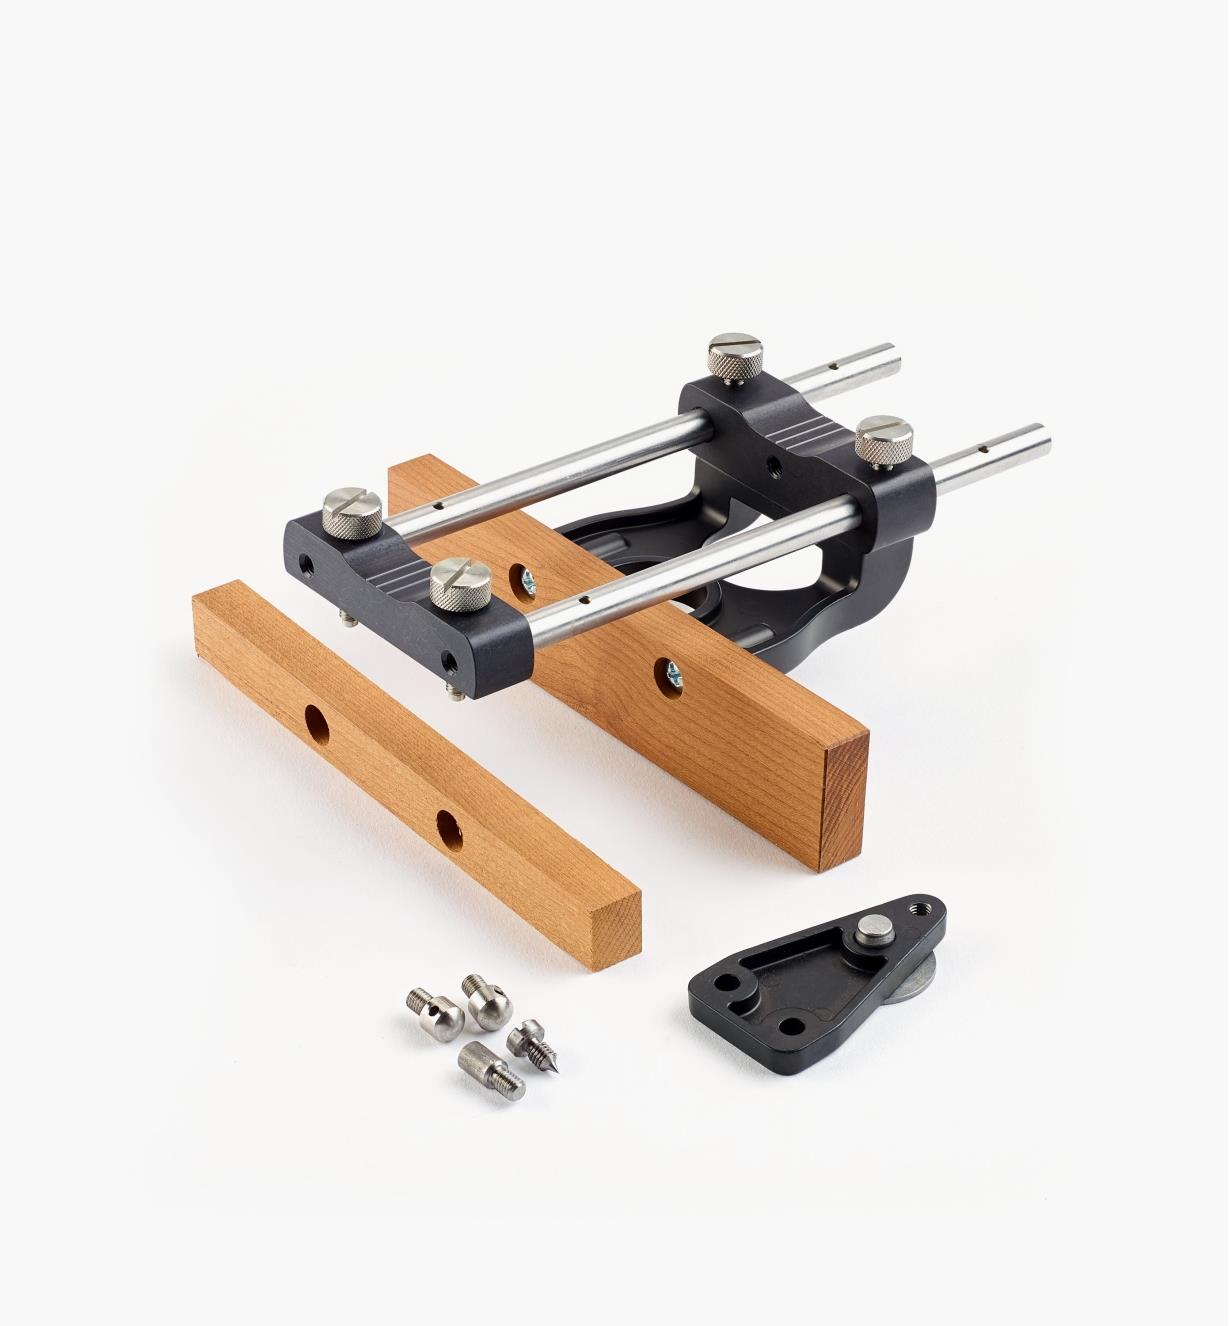 05J6503 - Fence and Center Kit